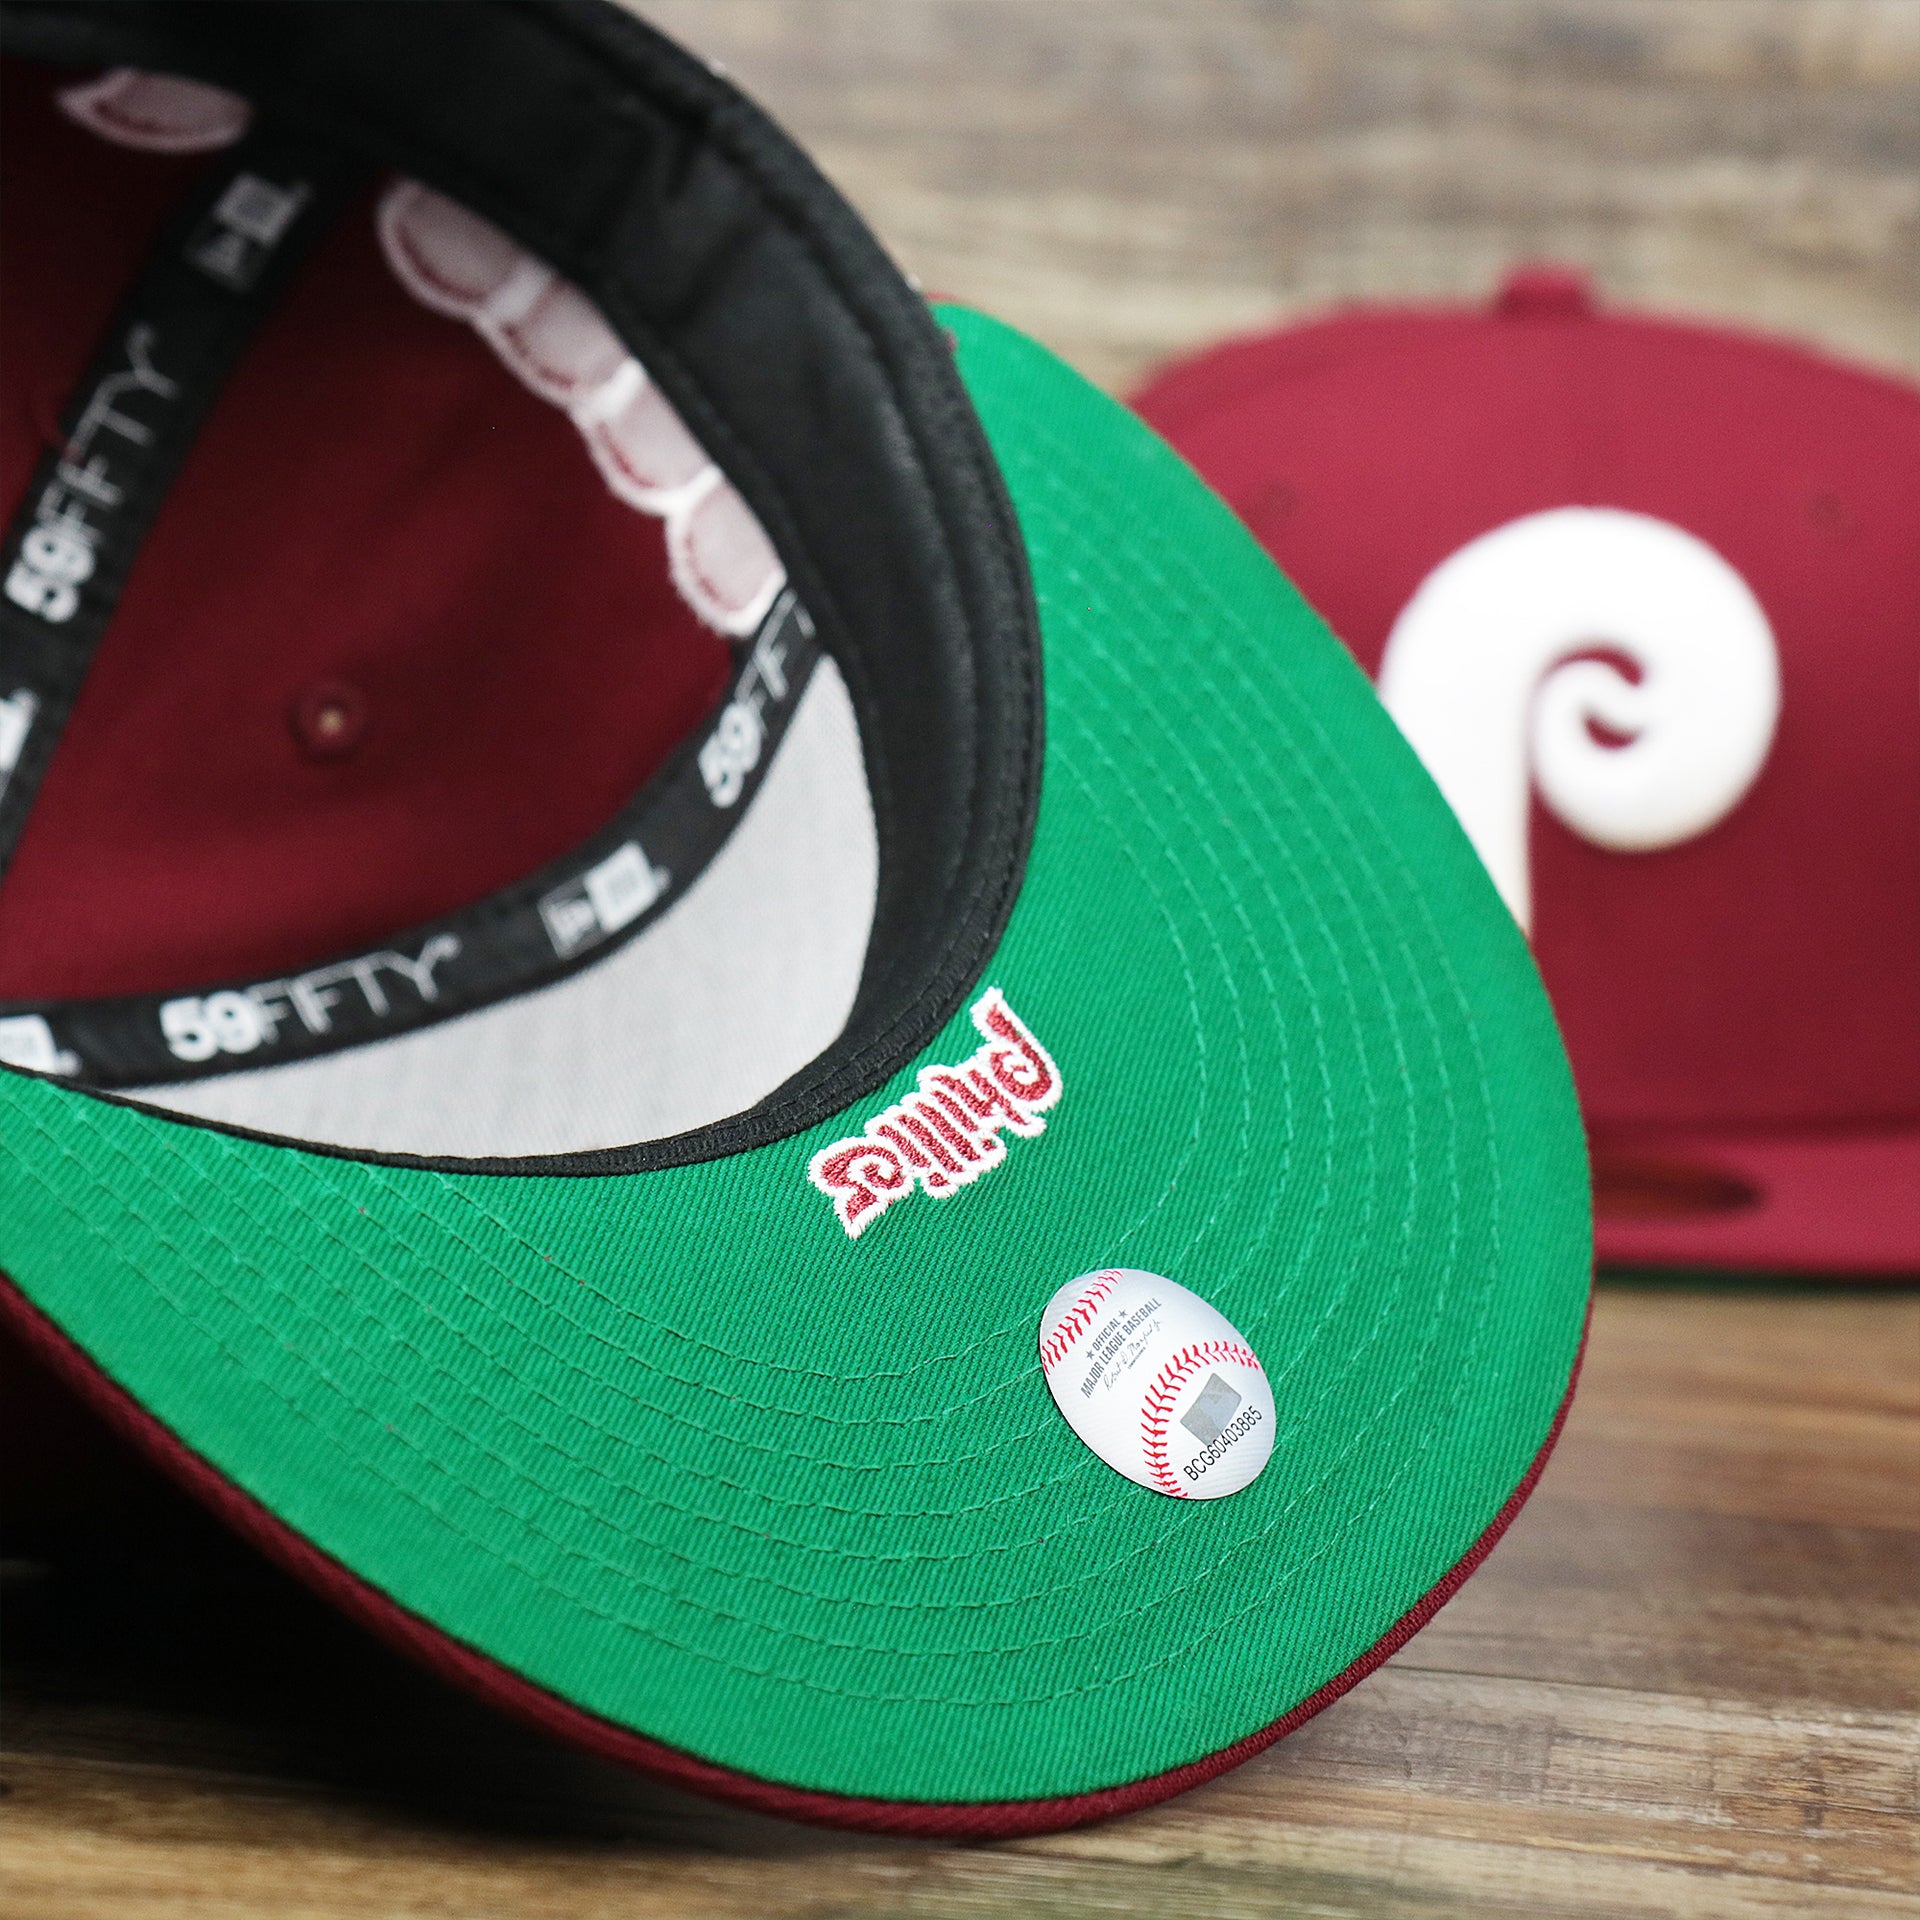 The Green Undervisor on the Cooperstown Philadelphia Phillies Wordmark Side Split Vintage Green Bottom With Phillies Embroidered Undervisor Fitted Cap | Maroon Blue 59Fifty Cap